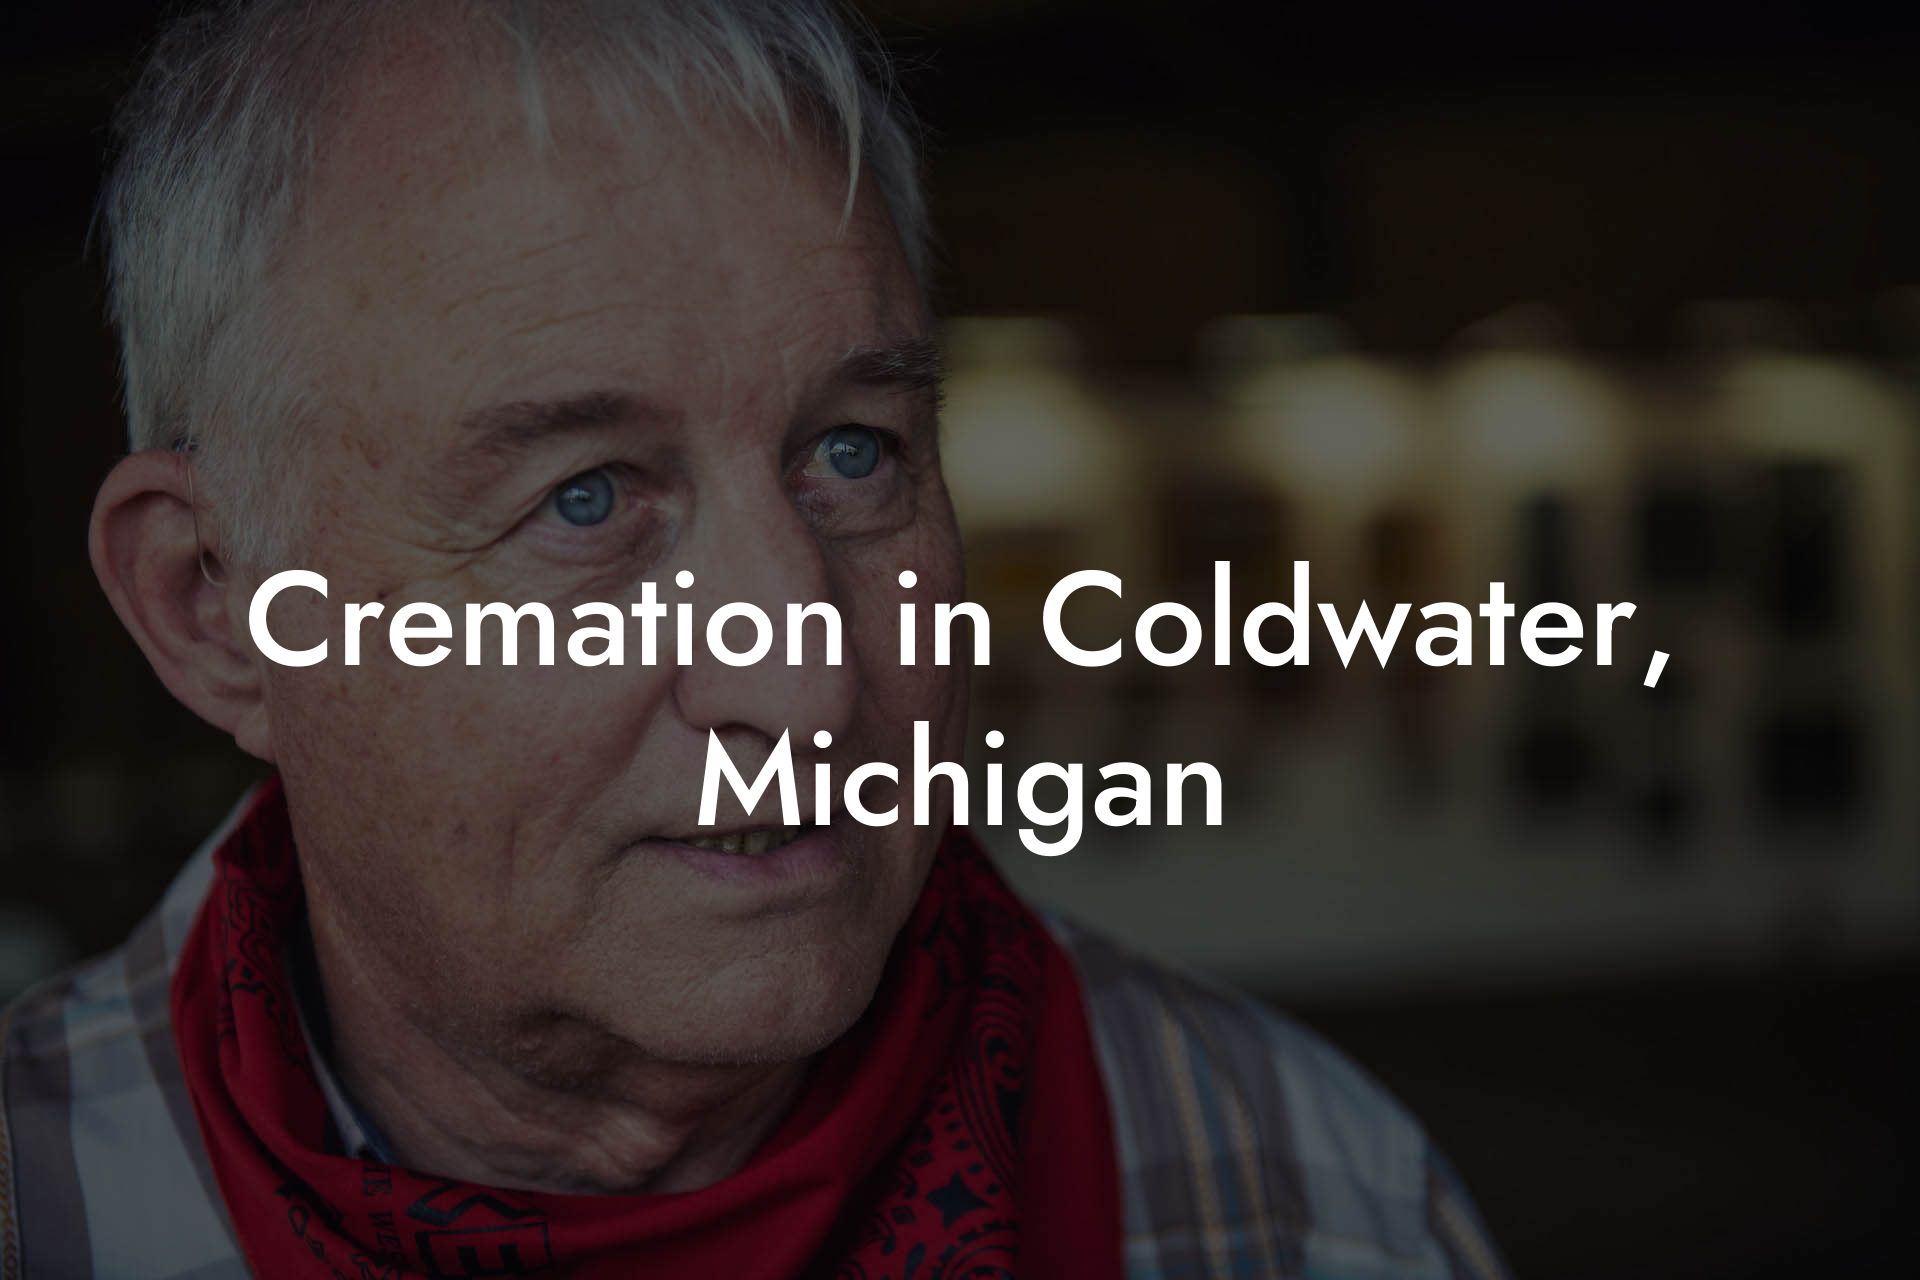 Cremation in Coldwater, Michigan